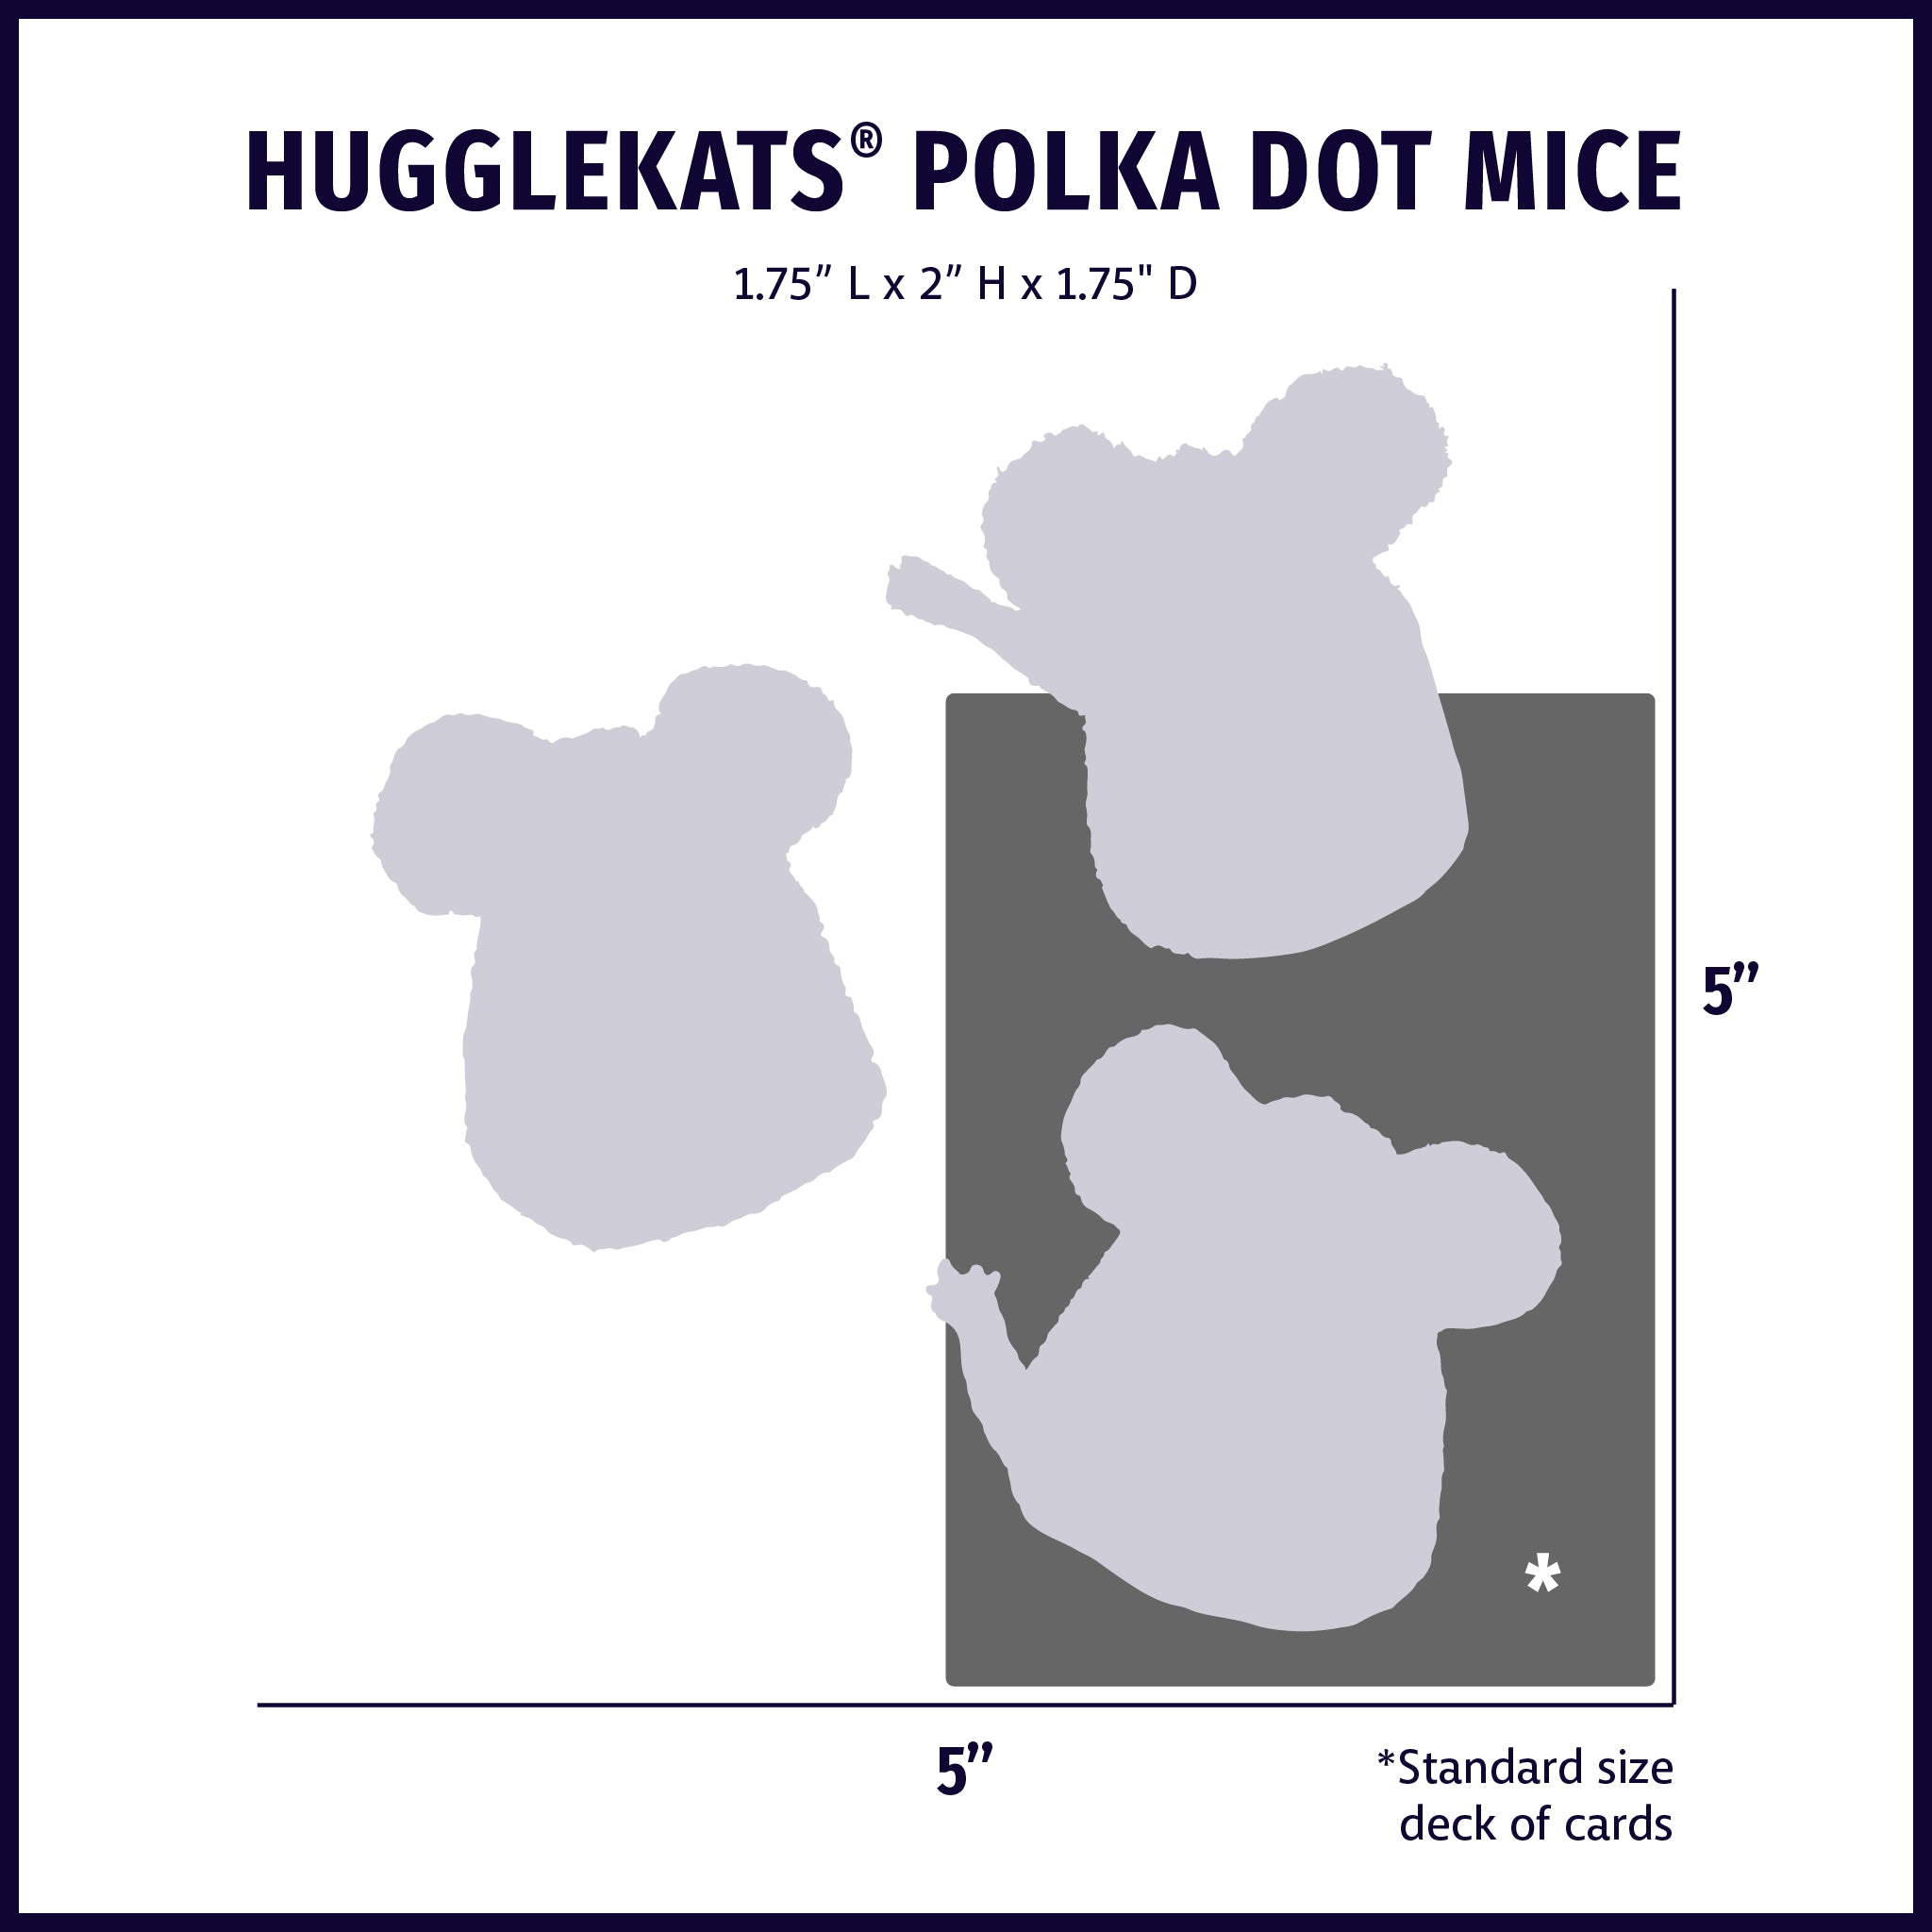 Size chart displaying HuggleKats® Polka Dot Mice plush cat toys silhouettes with approximate dimensions compared to standard size deck of cards.